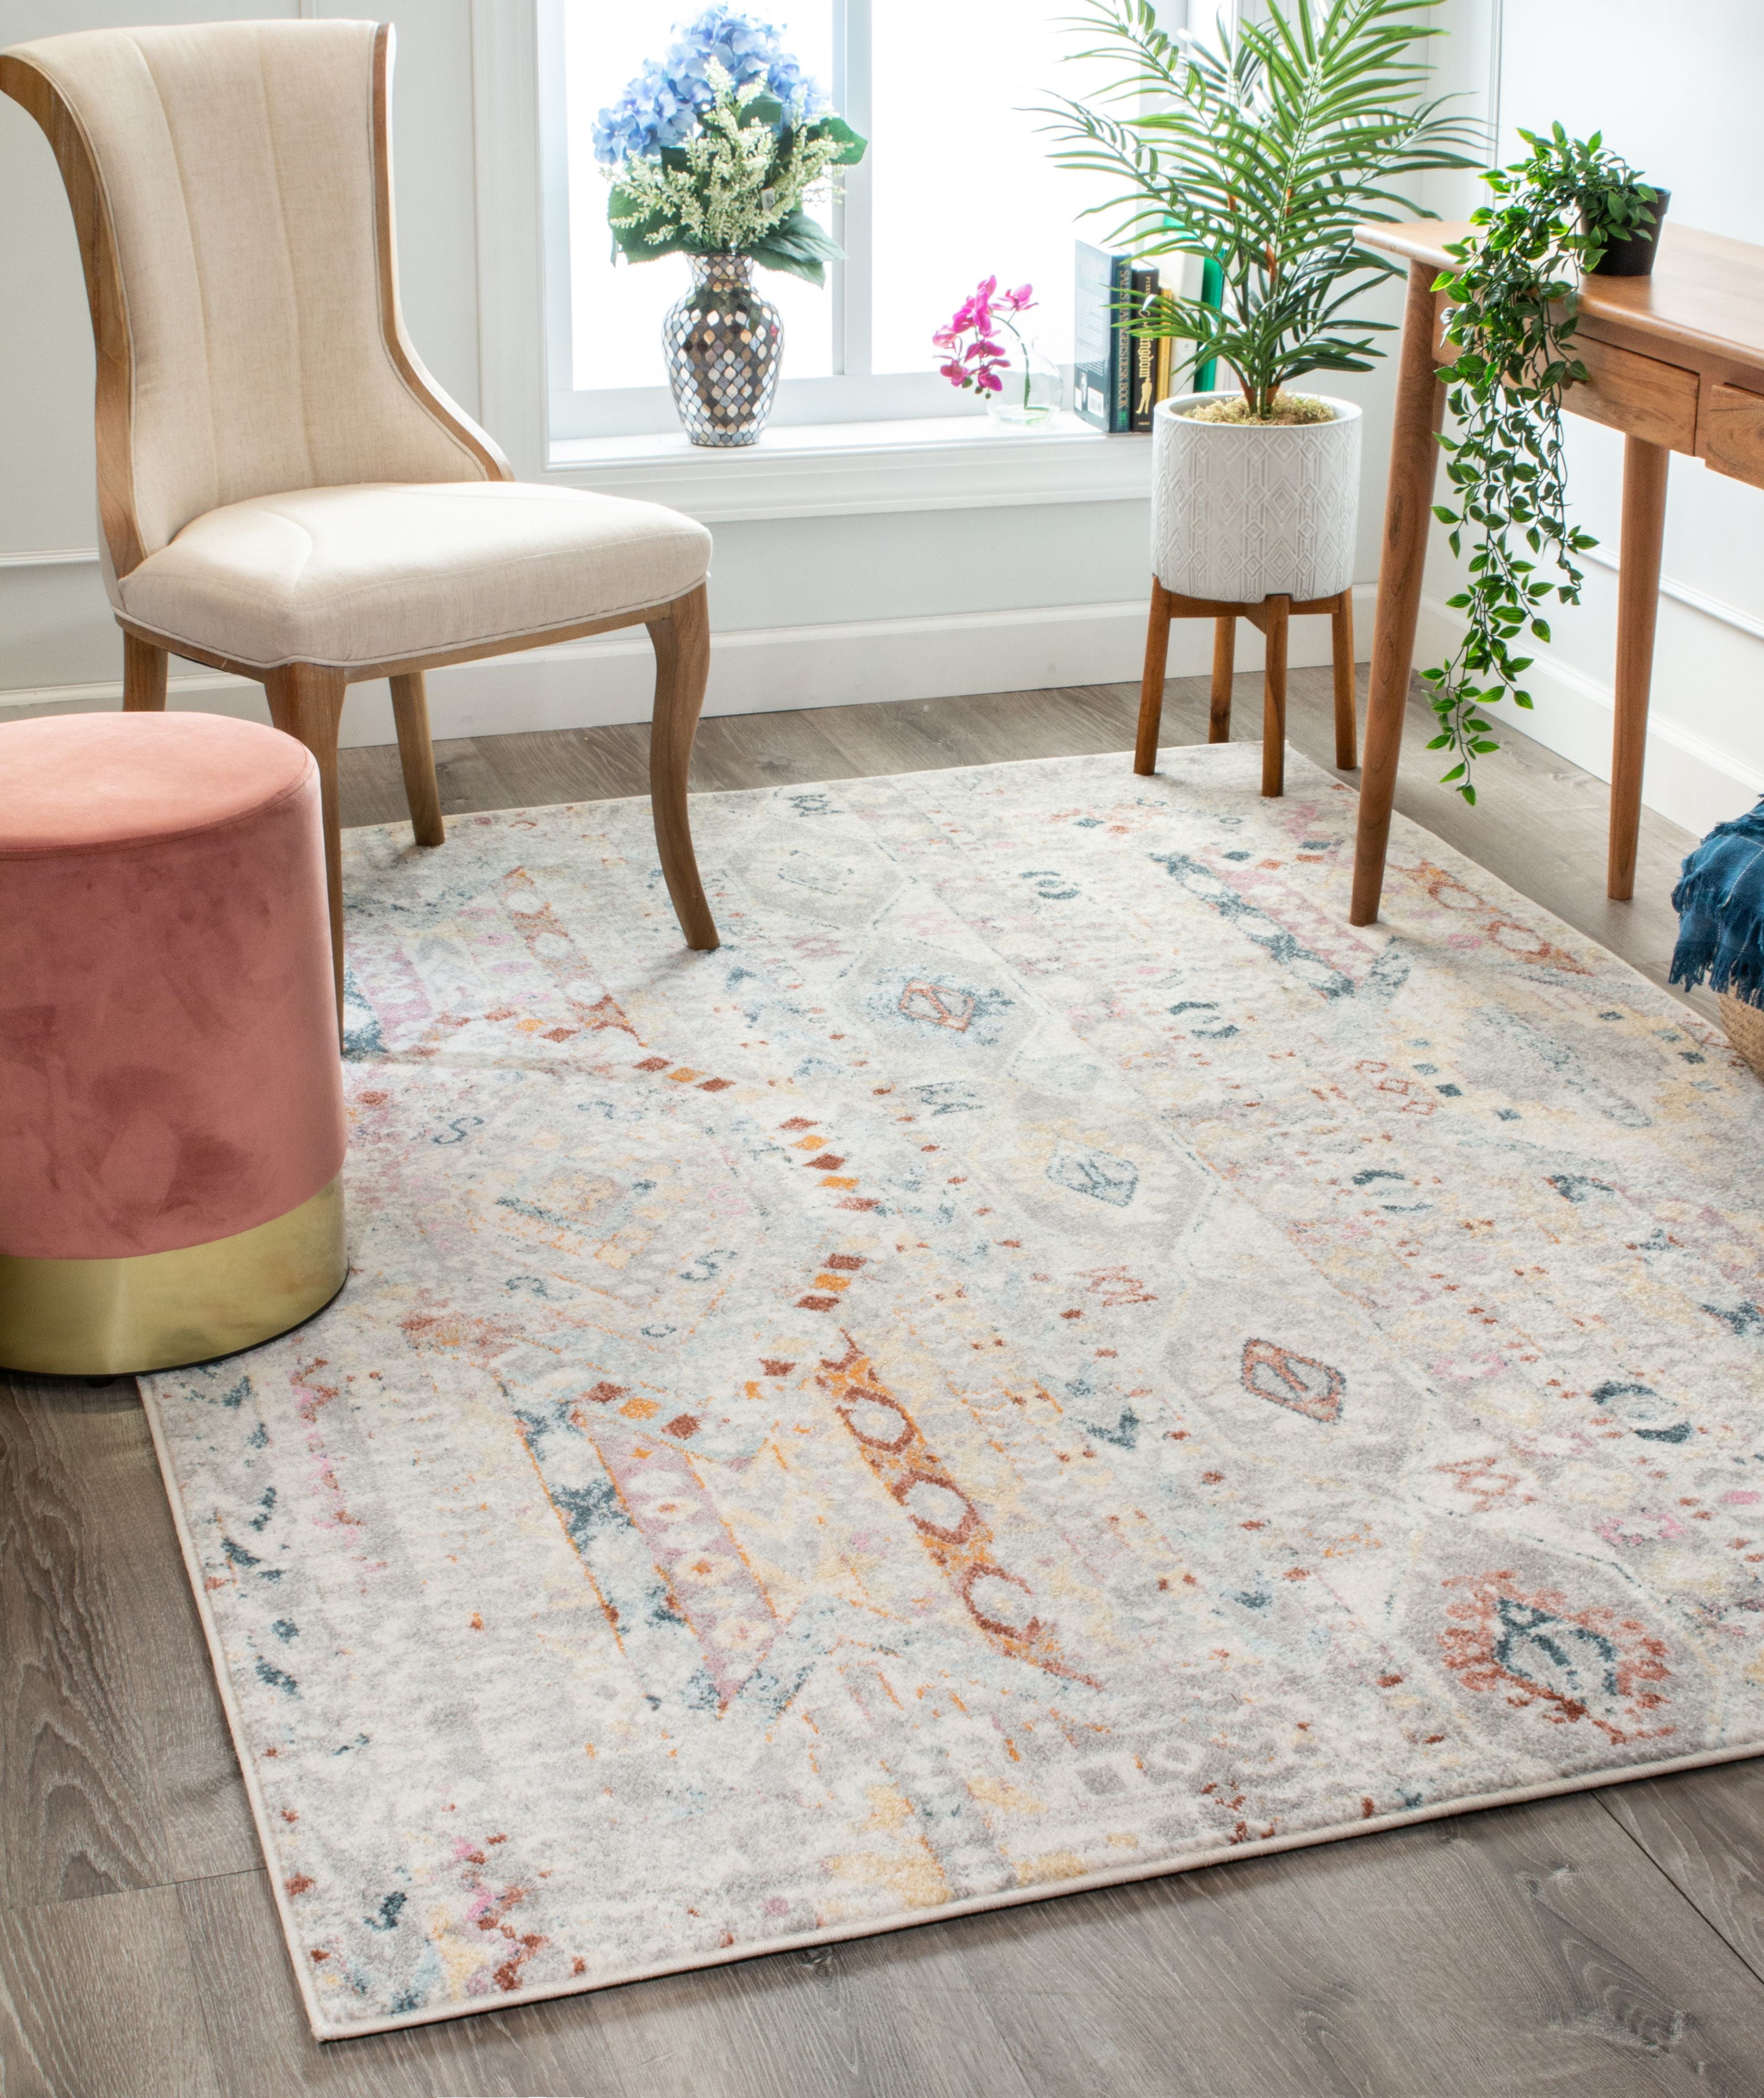  Diamond Pattern Rug for Large Space